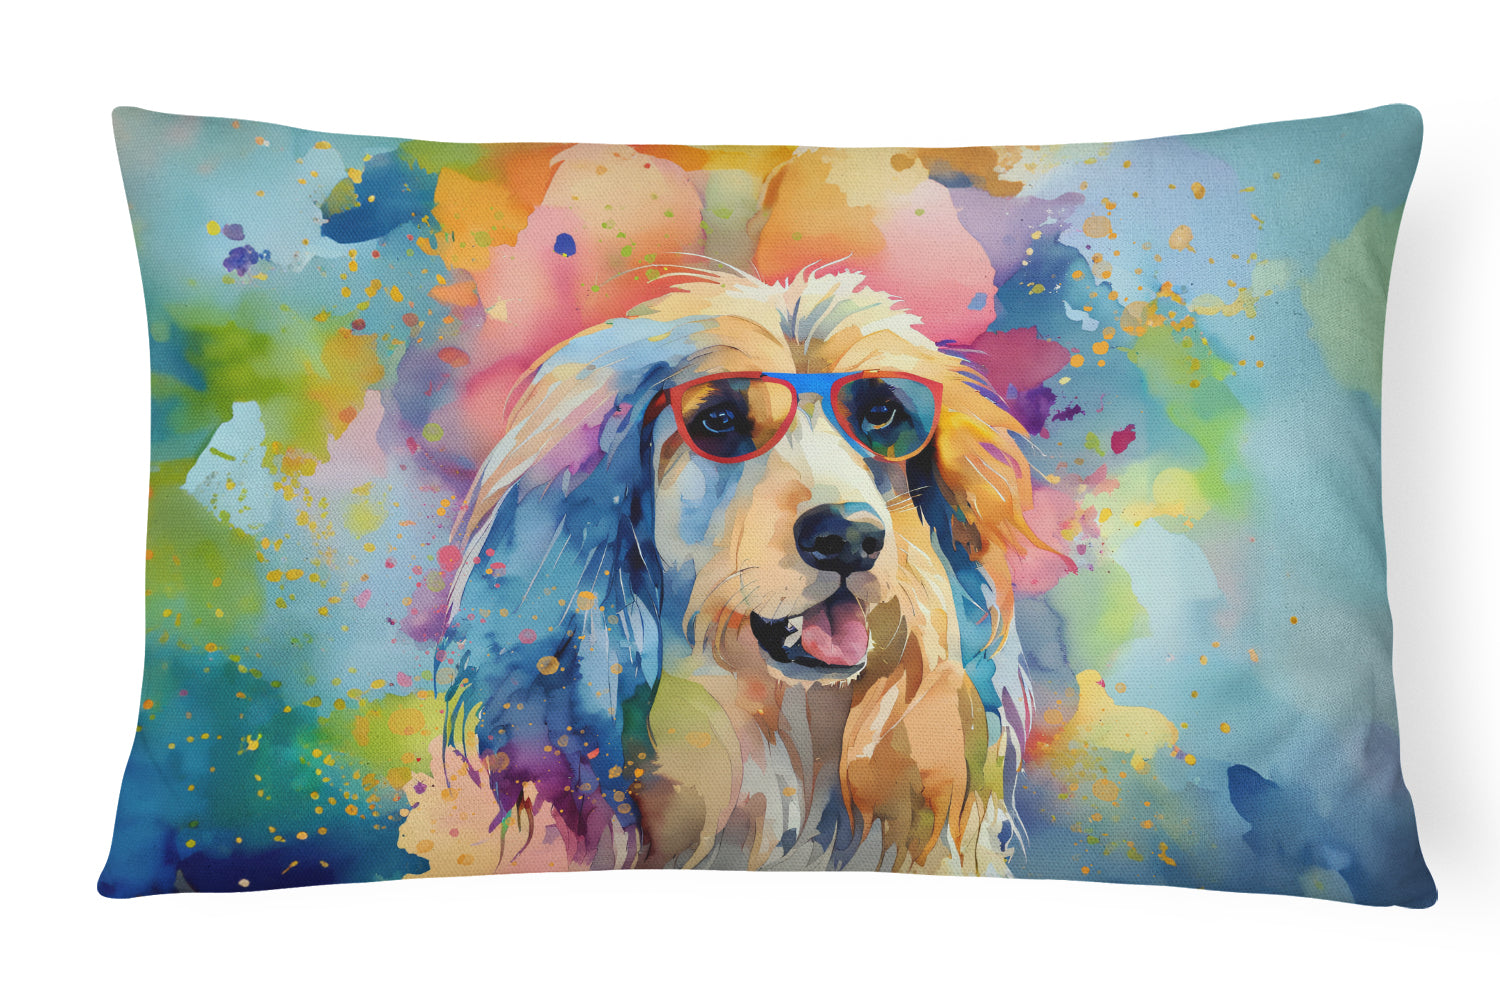 Buy this Afghan Hound Hippie Dawg Fabric Decorative Pillow